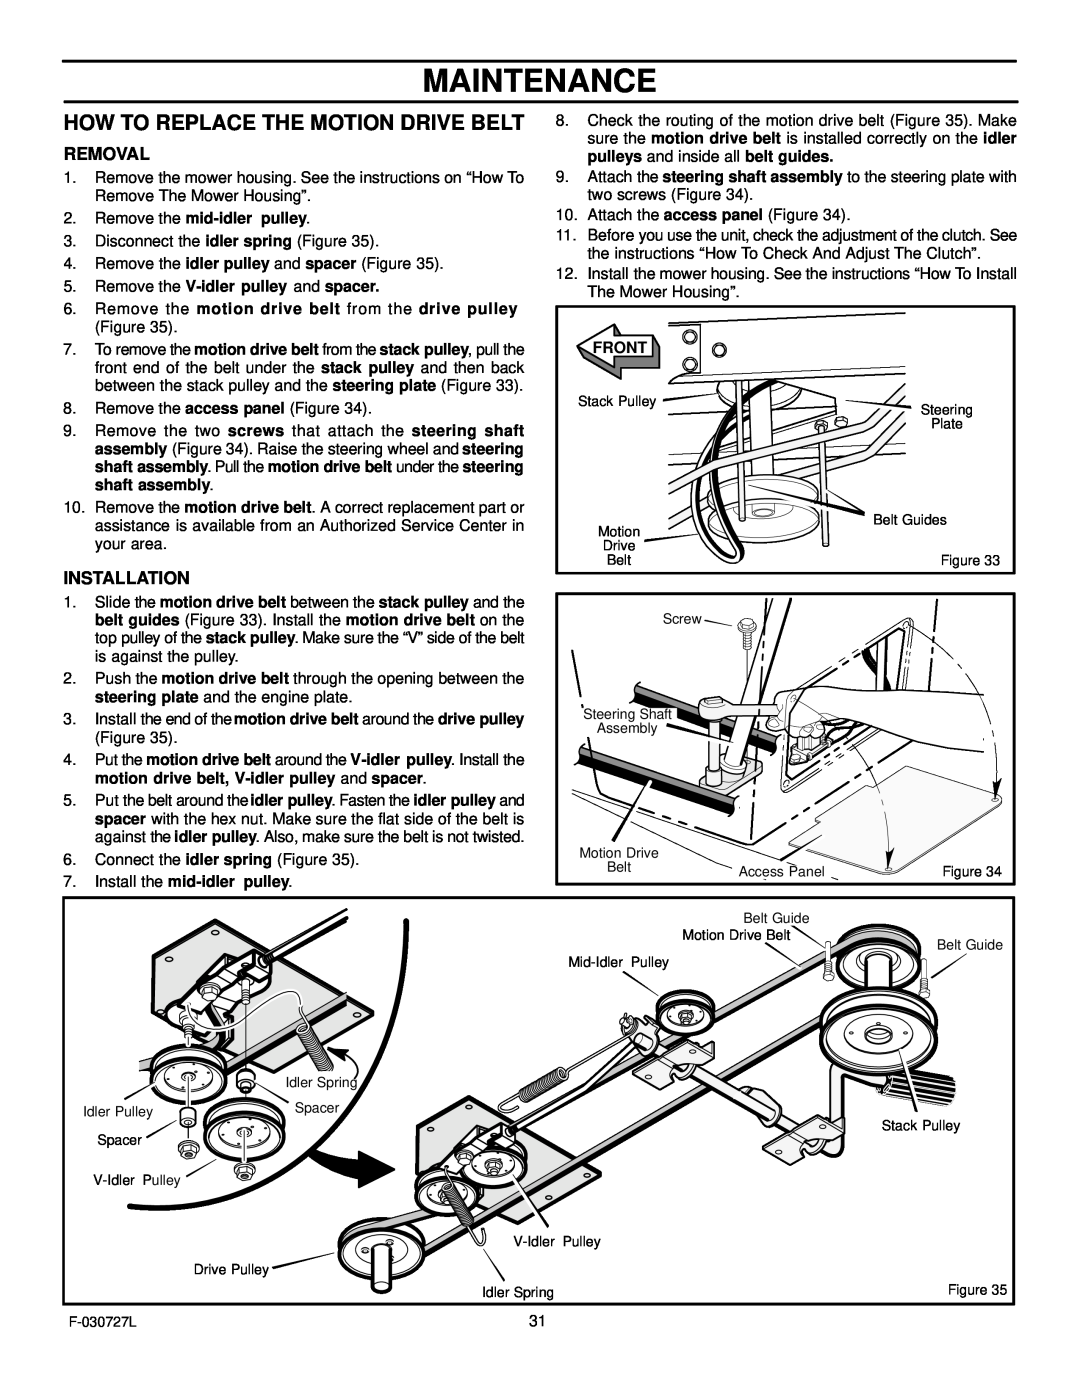 Murray 465600x8A manual Maintenance, How To Replace The Motion Drive Belt, Removal, Installation 